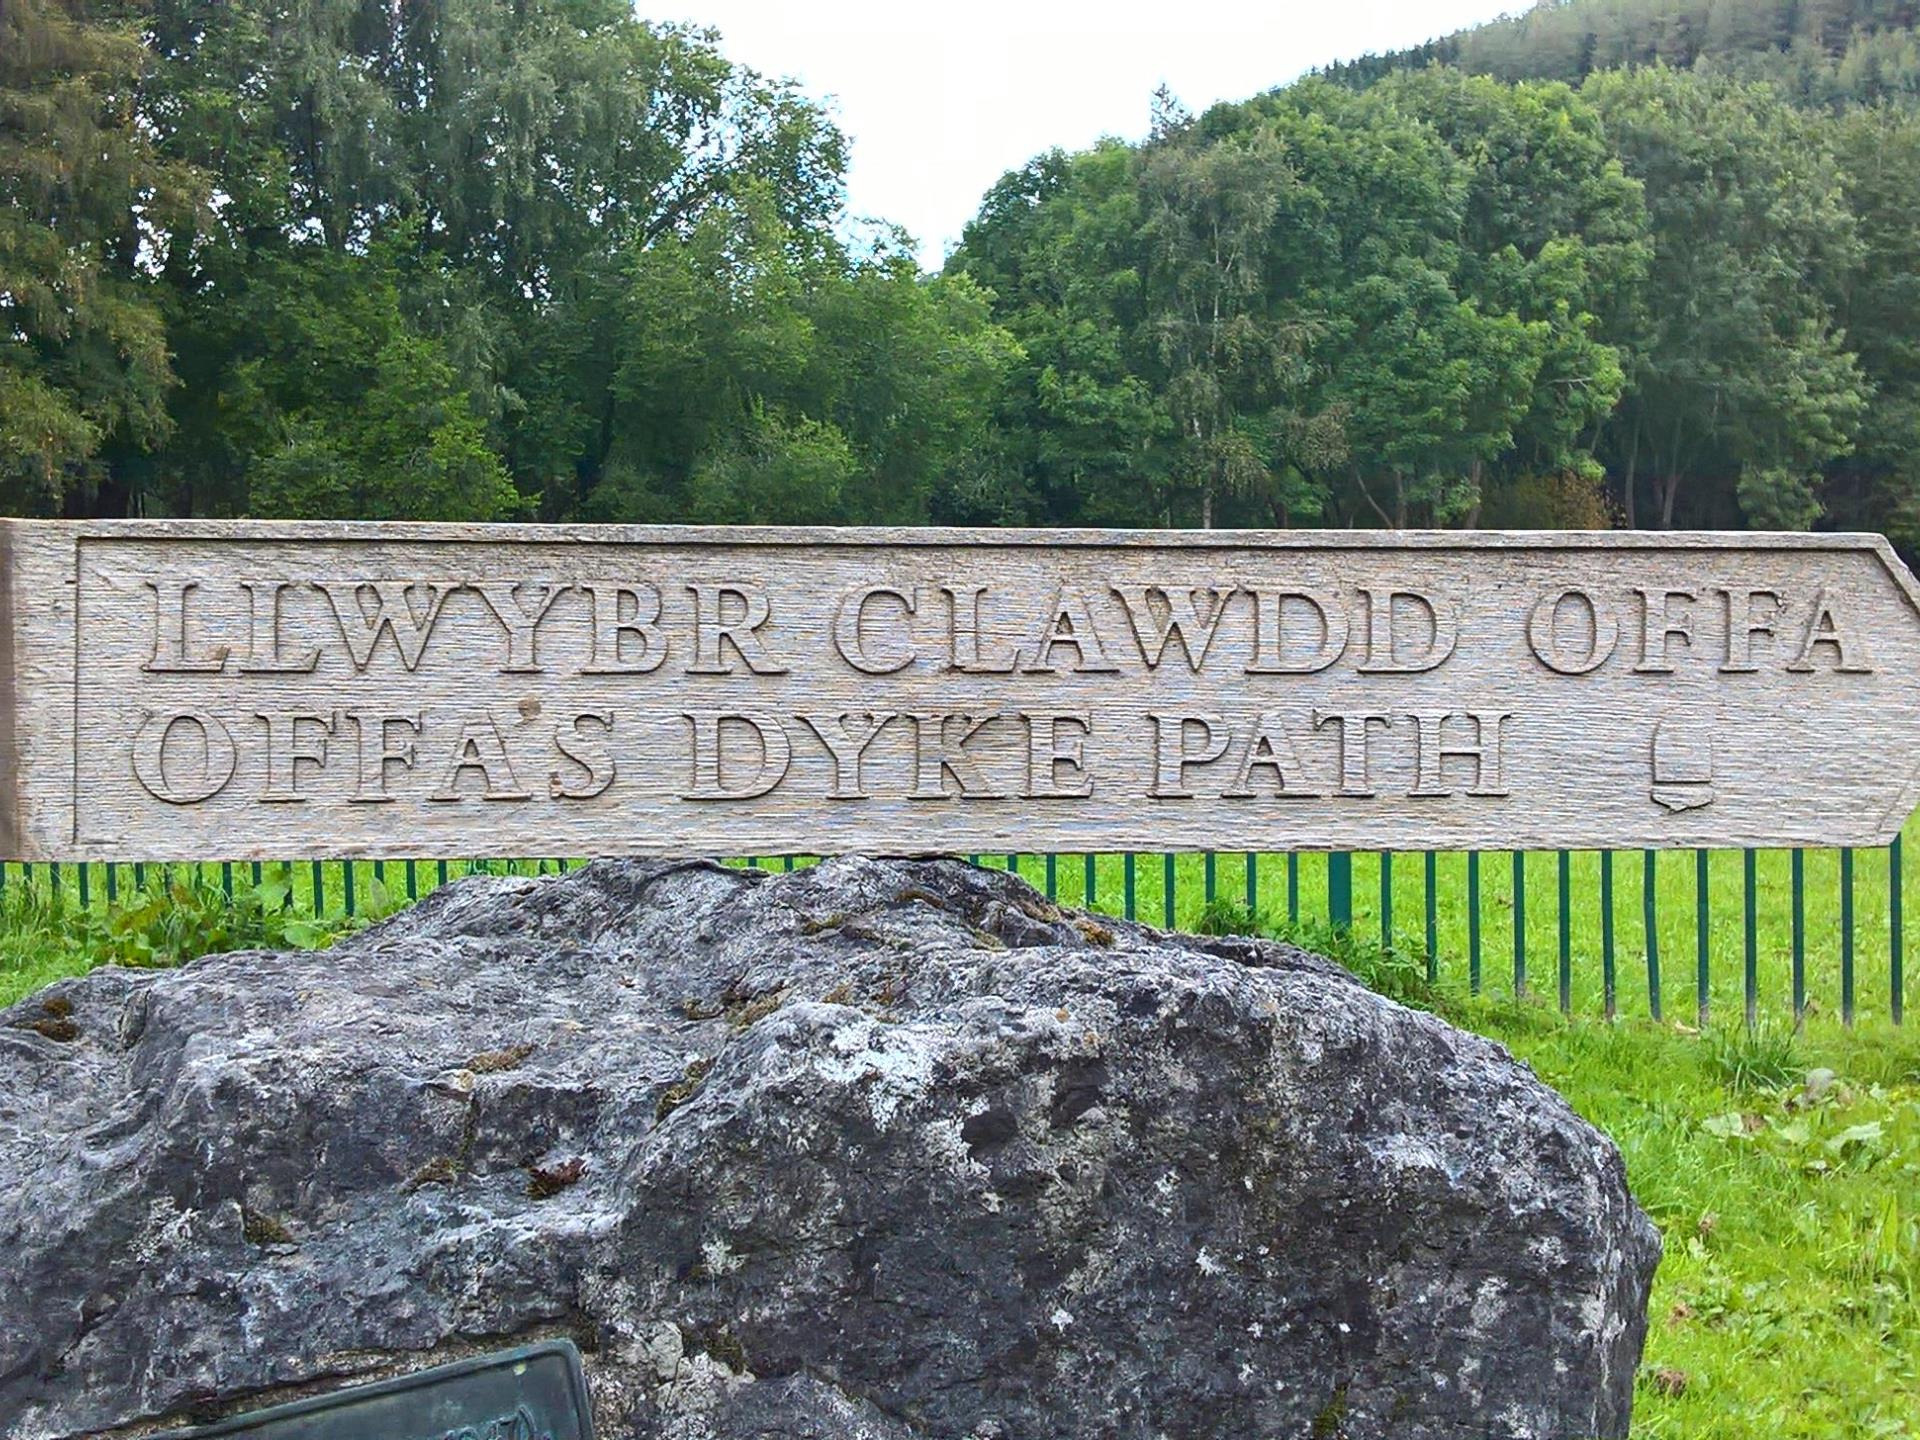 Offa's Dyke Path passes in front the Centre